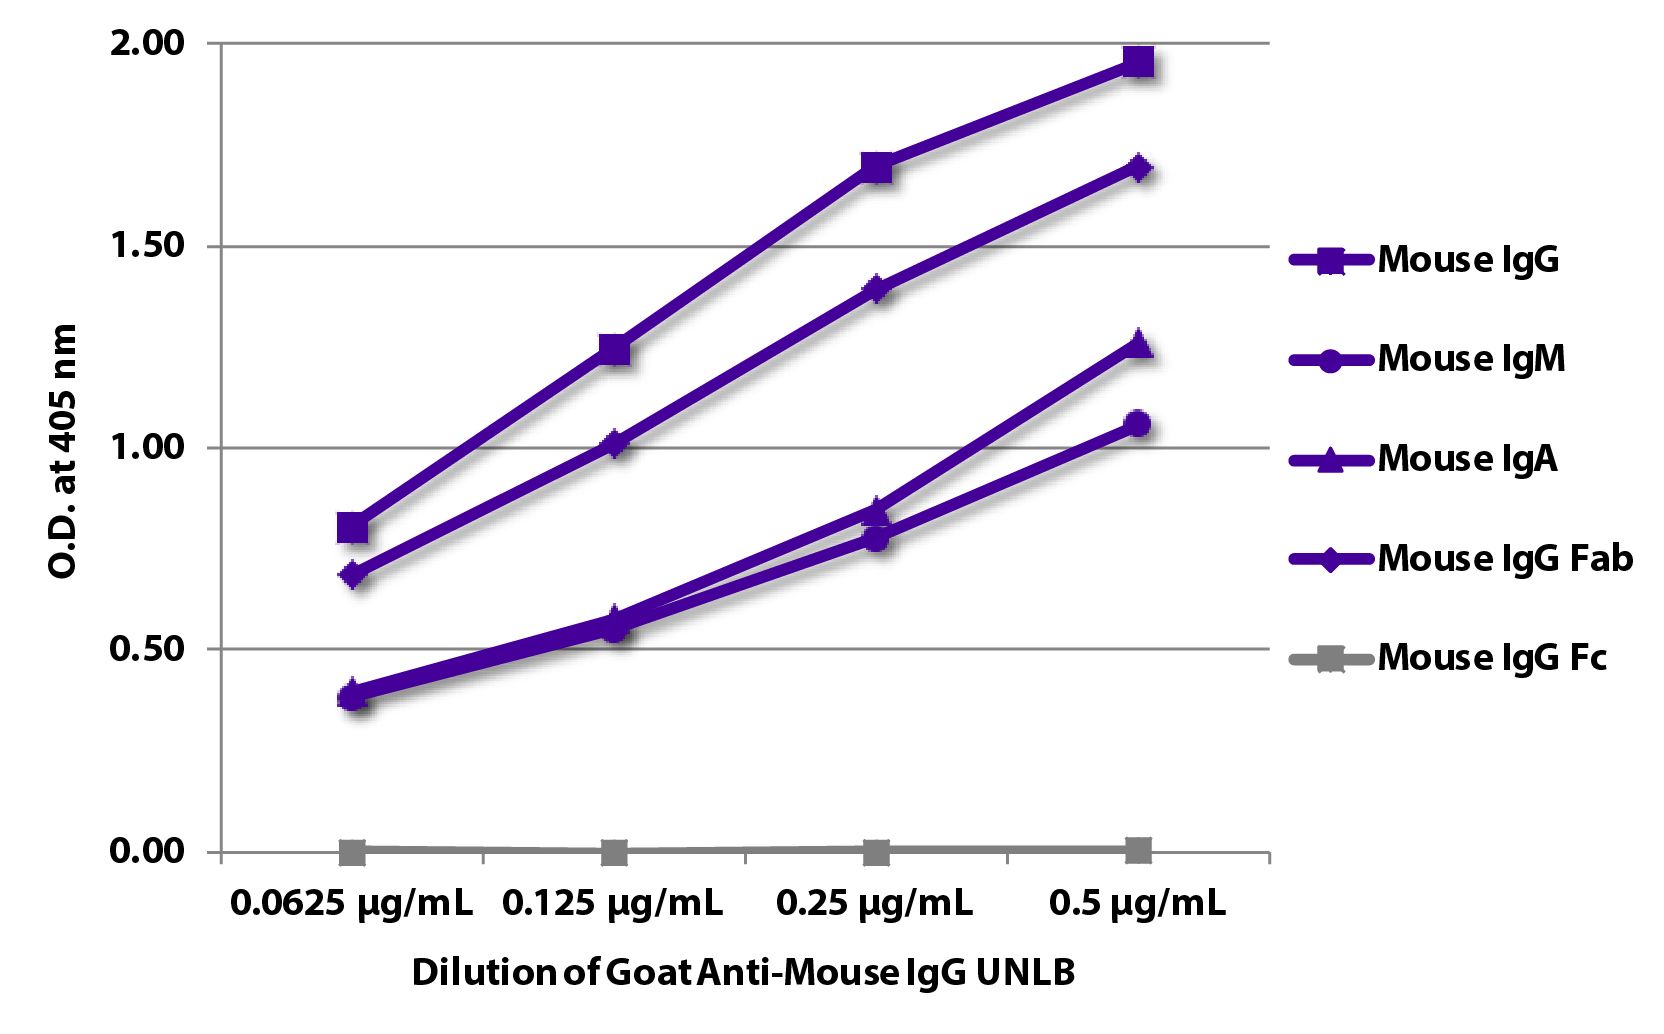 ELISA plate was coated with purified mouse IgG, IgM, IgA, IgG Fab, and IgG Fc.  Immunoglobulins were detected with serially diluted Goat Anti-Mouse IgG Fab-UNLB (SB Cat. No. 1015-01) followed by Mouse Anti-Goat IgG Fc-HRP (SB Cat. No. 6158-05).